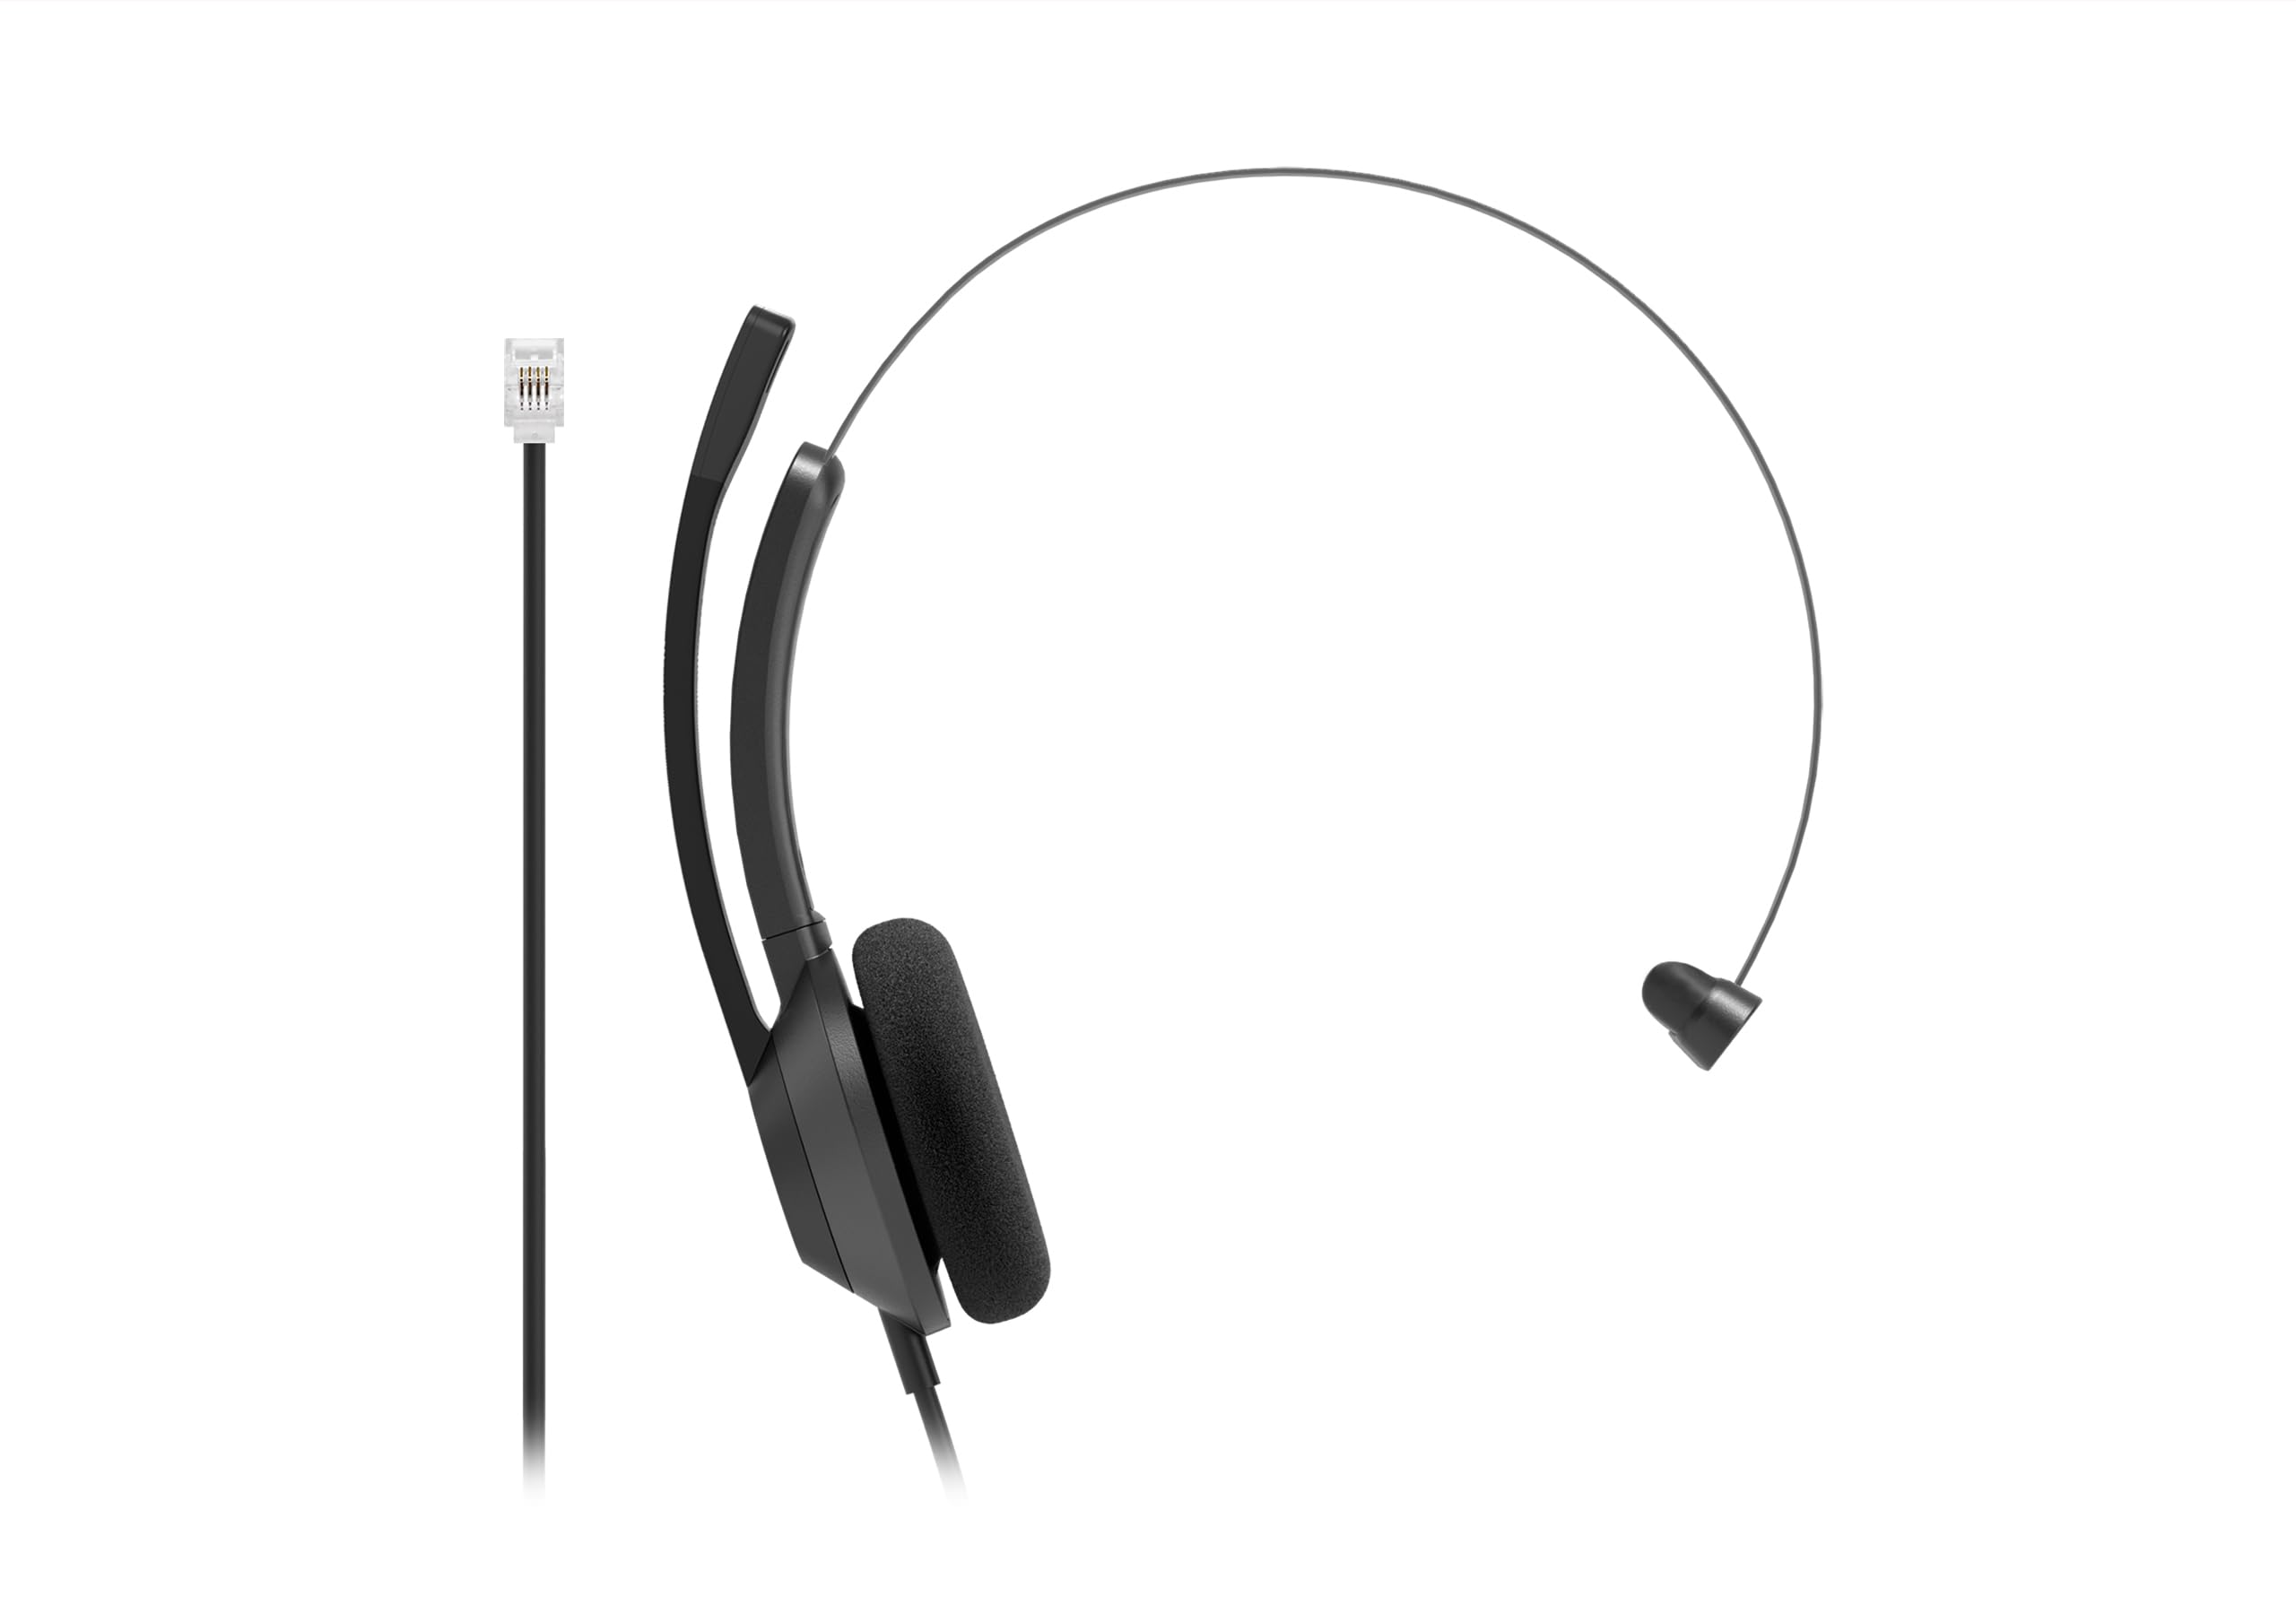 Cisco Headset 321 RJ9, Wired Single On-Ear Headphones, RJ9 Connection for Cisco IP Phone, Carbon Black, 2-Year Limited Liability Warranty (HS-W-321-C-RJ9)